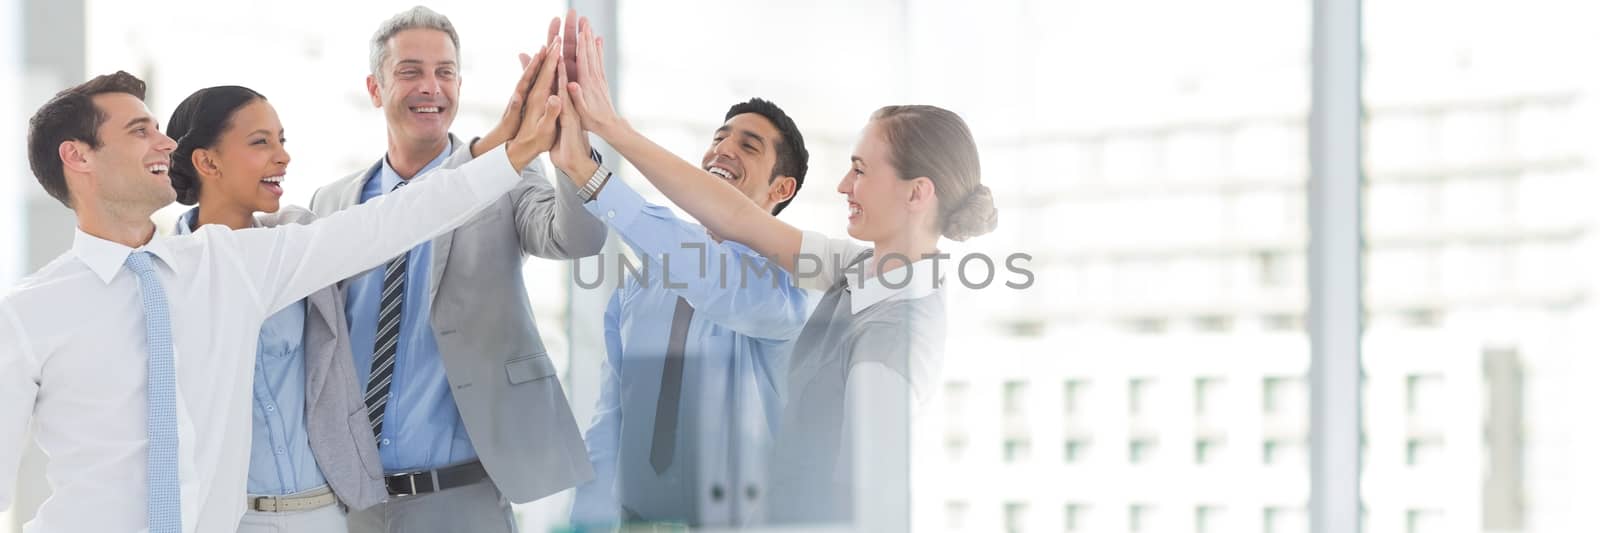 Teamwork transition with business people joining hands by Wavebreakmedia